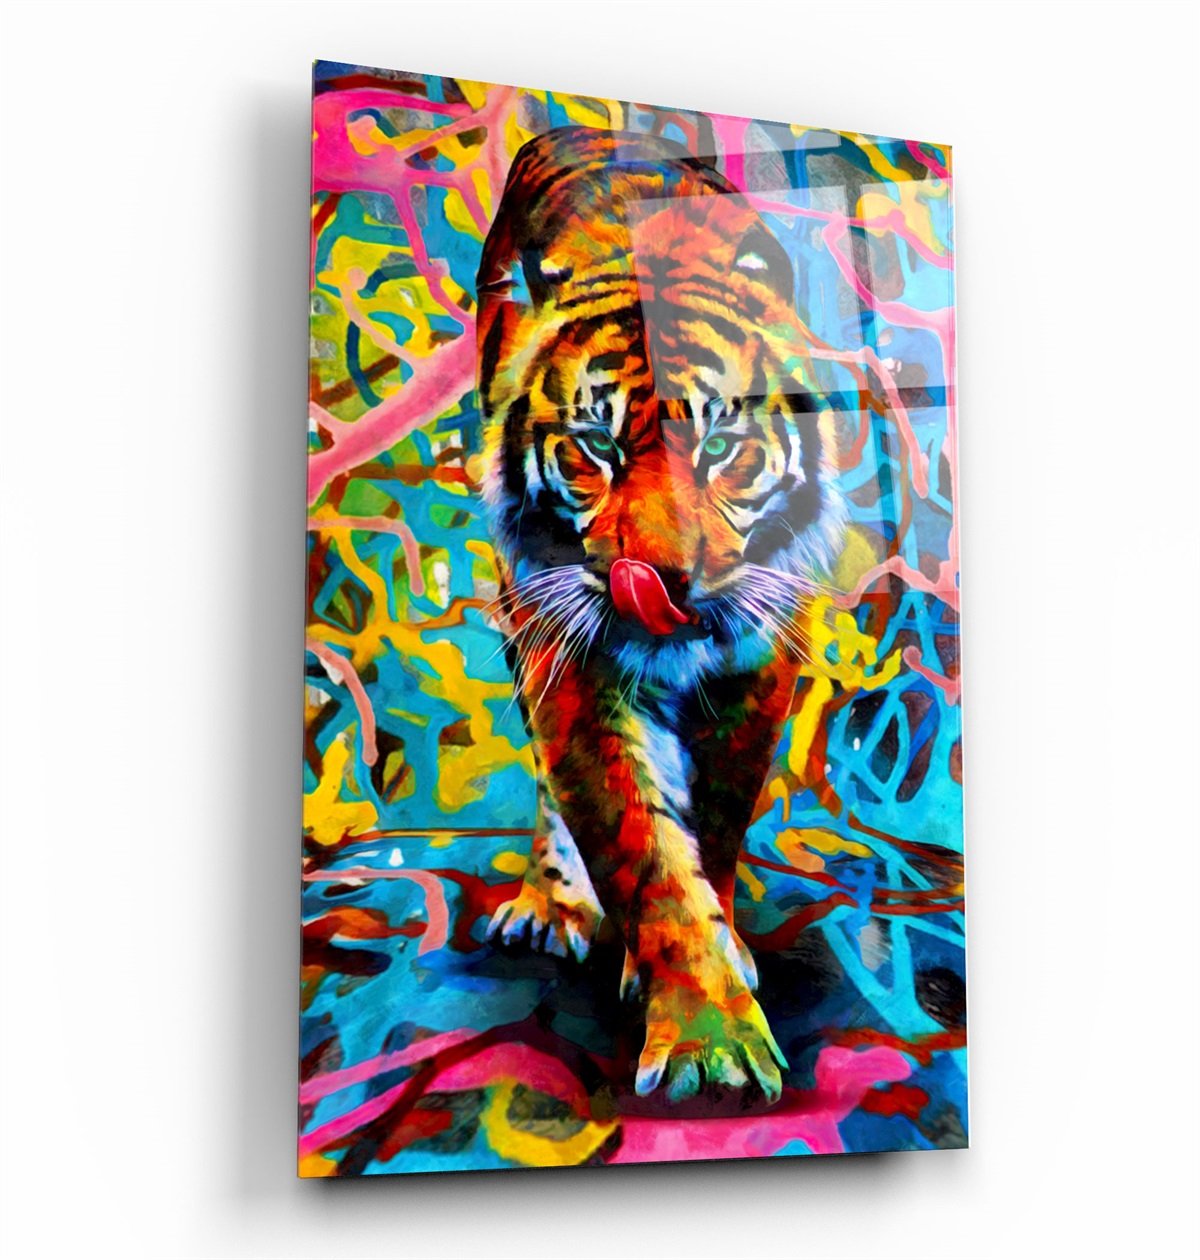 ・"Abstract Colorful Tiger"・Glass Wall Art